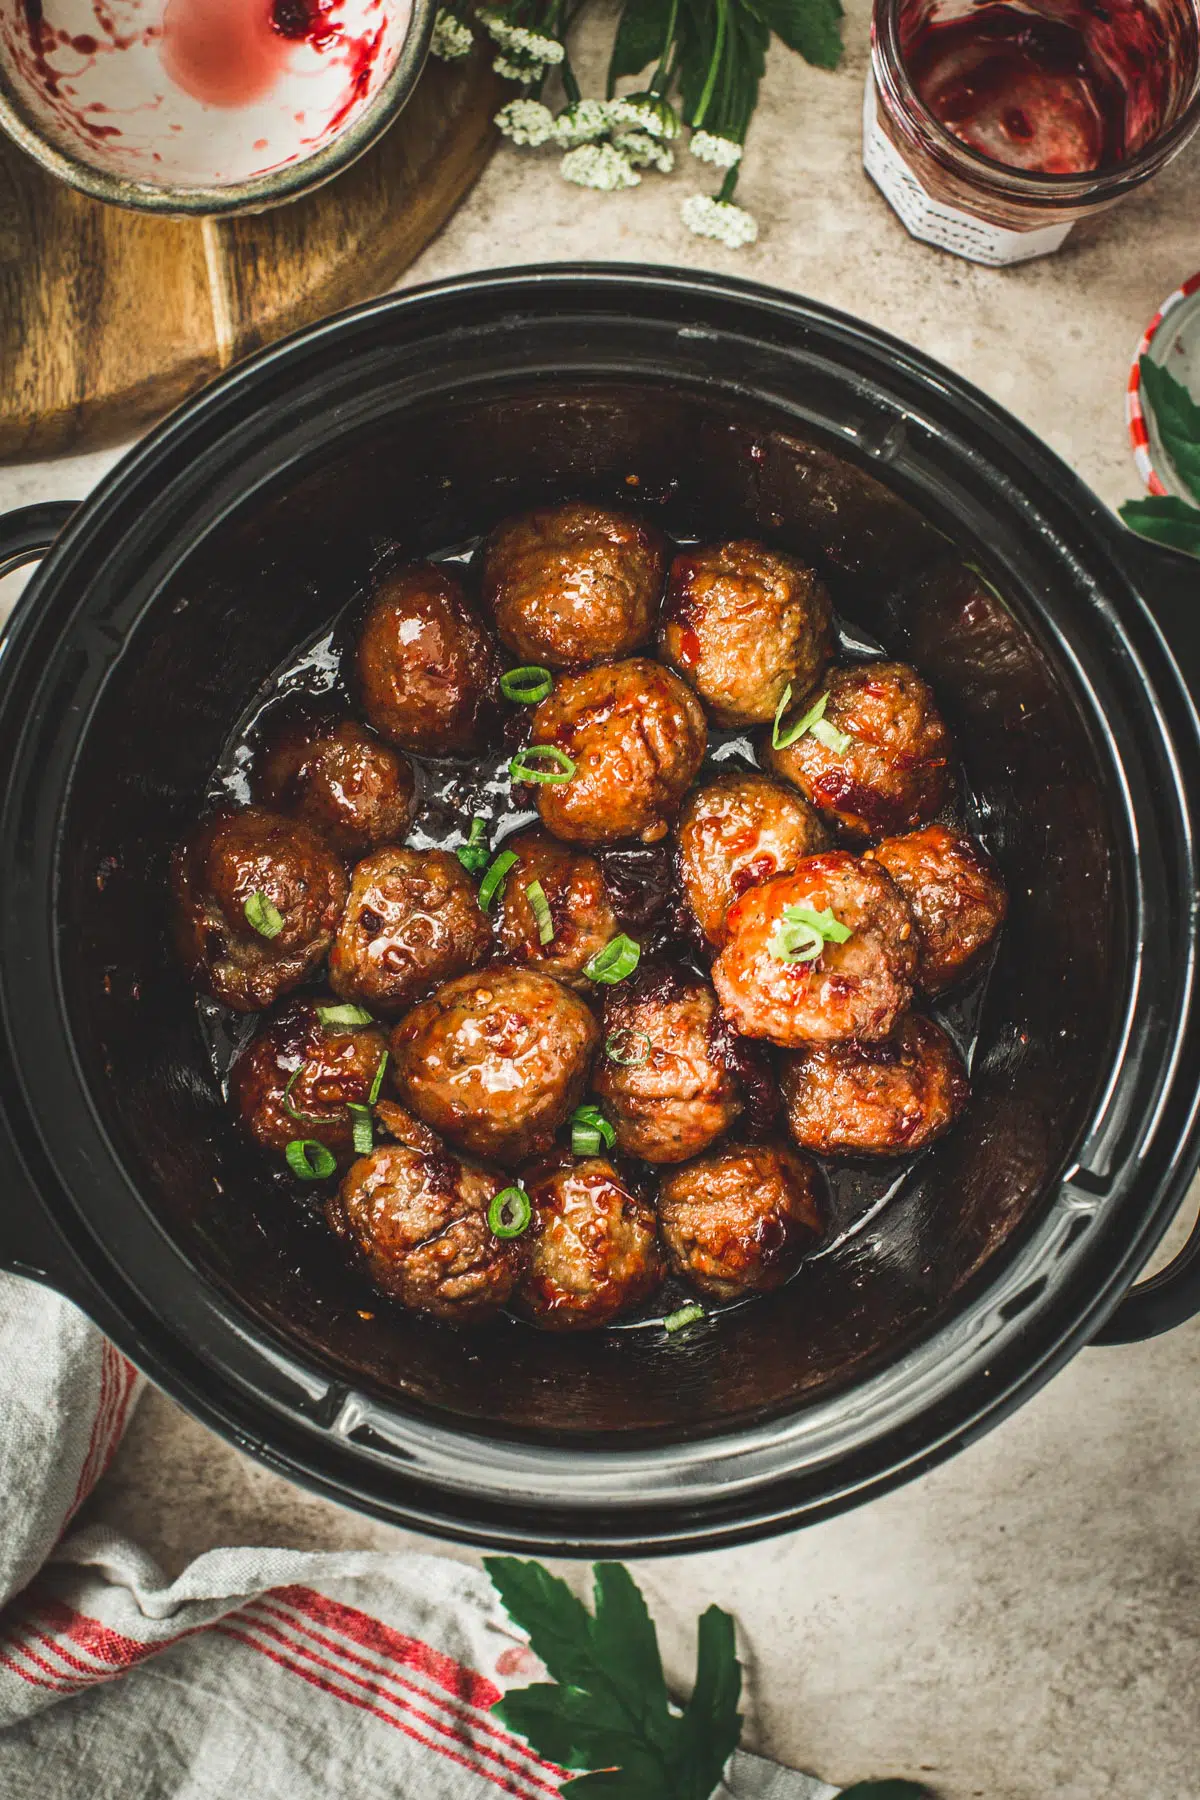 Meatballs with grape jelly and chili sauce in a crockpot.